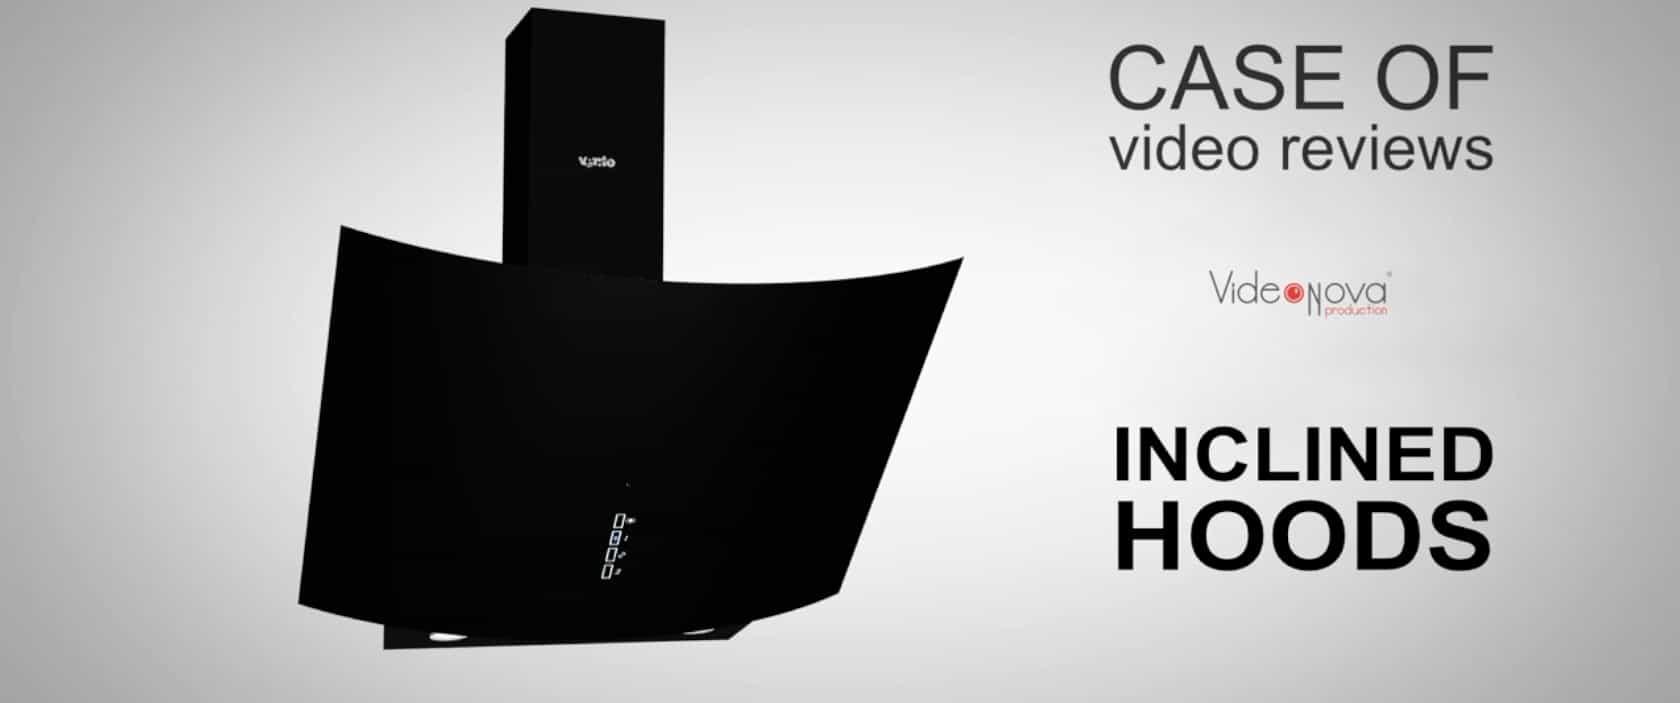 Case video review of large household appliances" Review of the hood. Case"